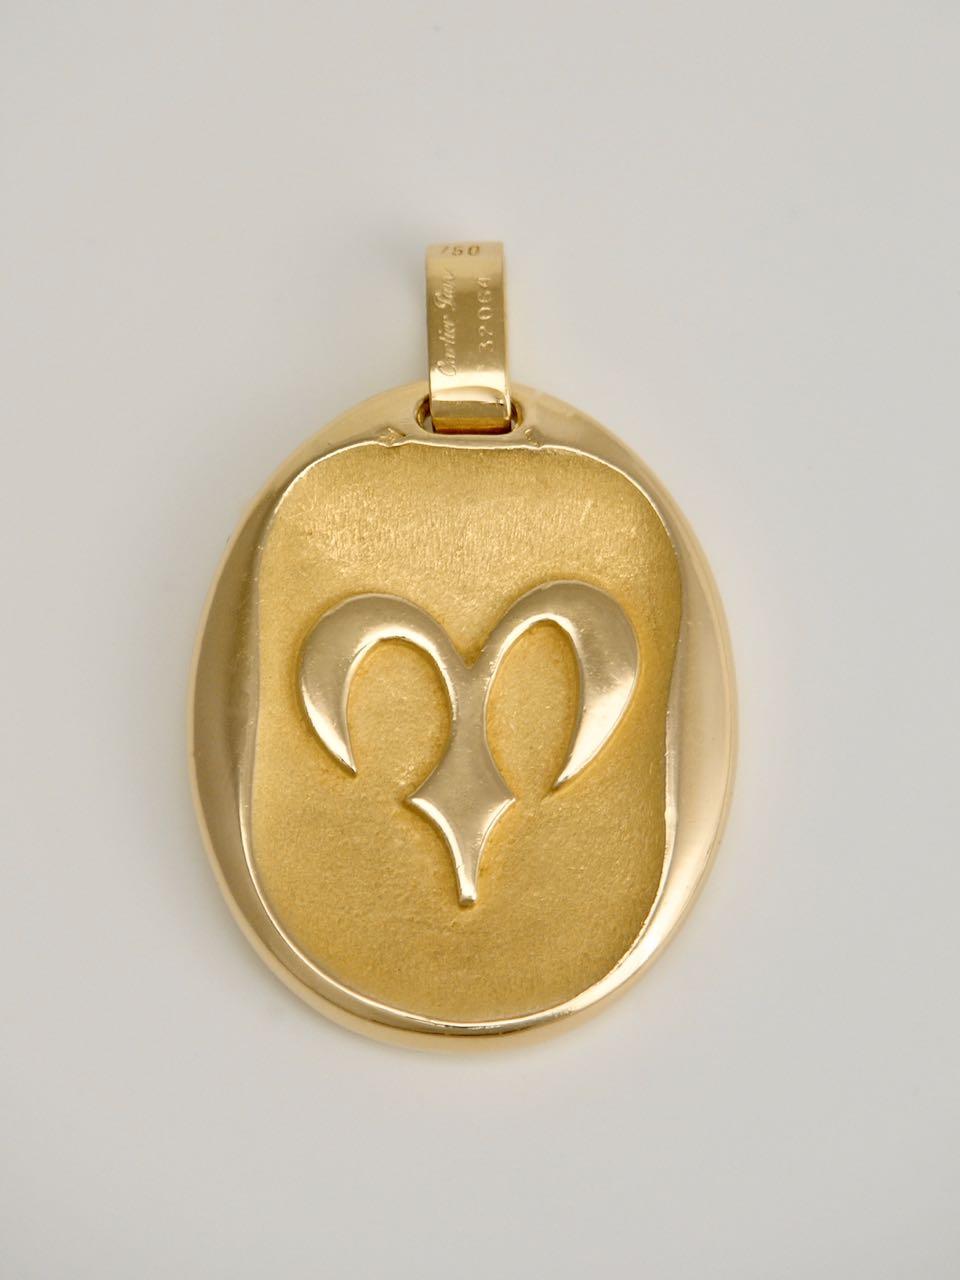 A heavy double sided 18k yellow gold Zodiac pendant for Aries (March 21 - April 19) showing a Ram leaping against a flame motif background and, to the reverse, a stylised astrological symbol of a Ram's head against a granular textured ground, the